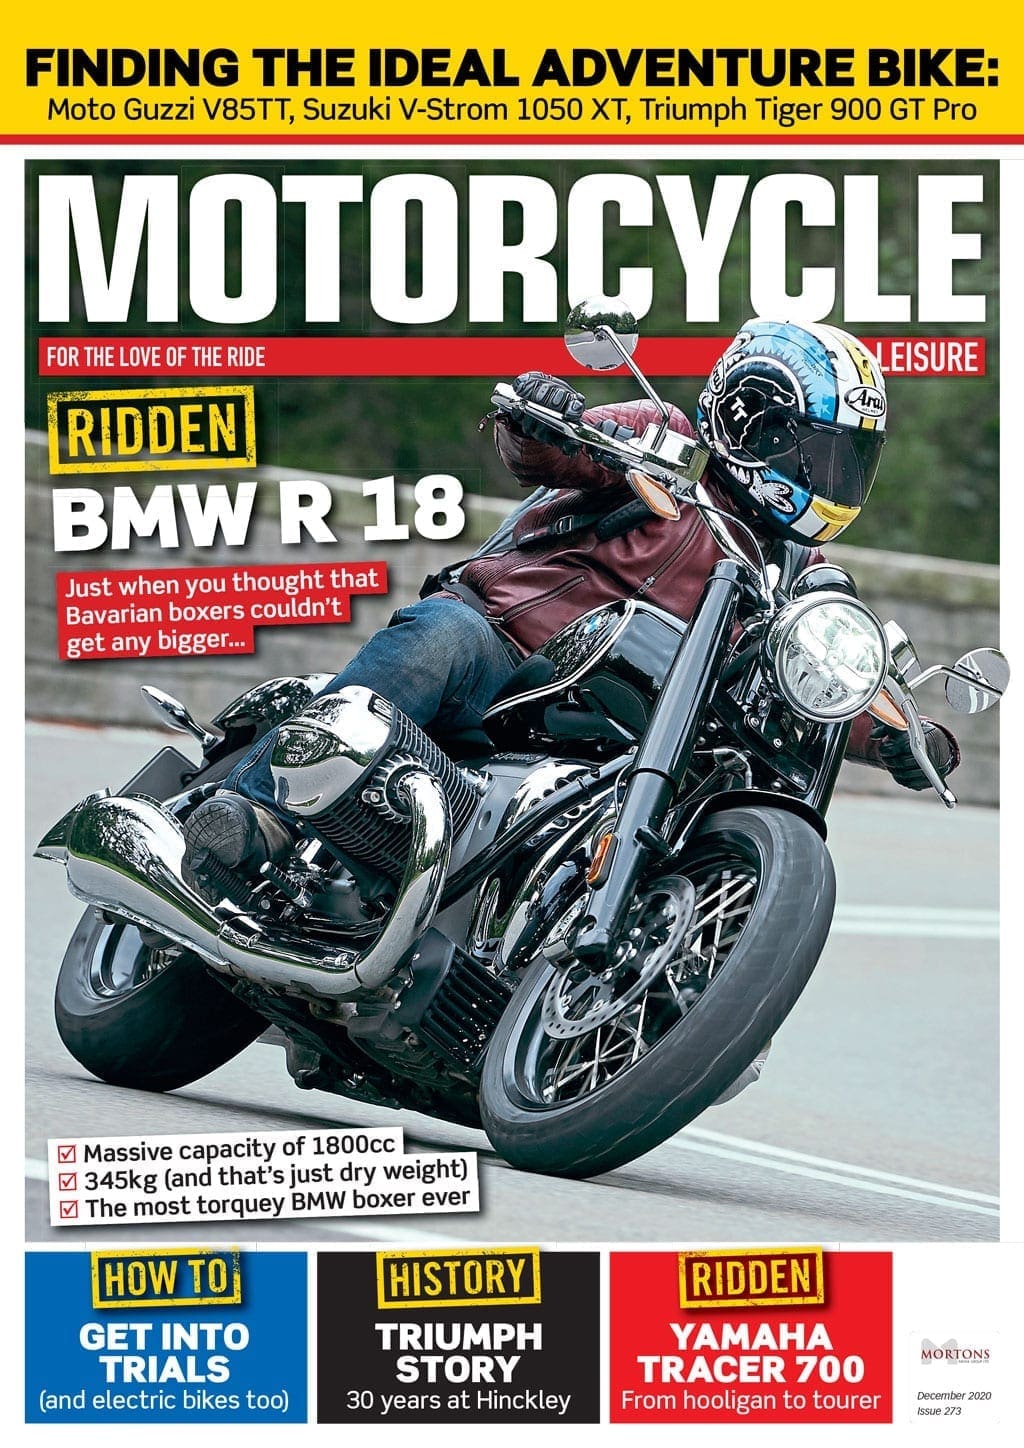 PREVIEW: December issue of Motorcycle Sport & Leisure